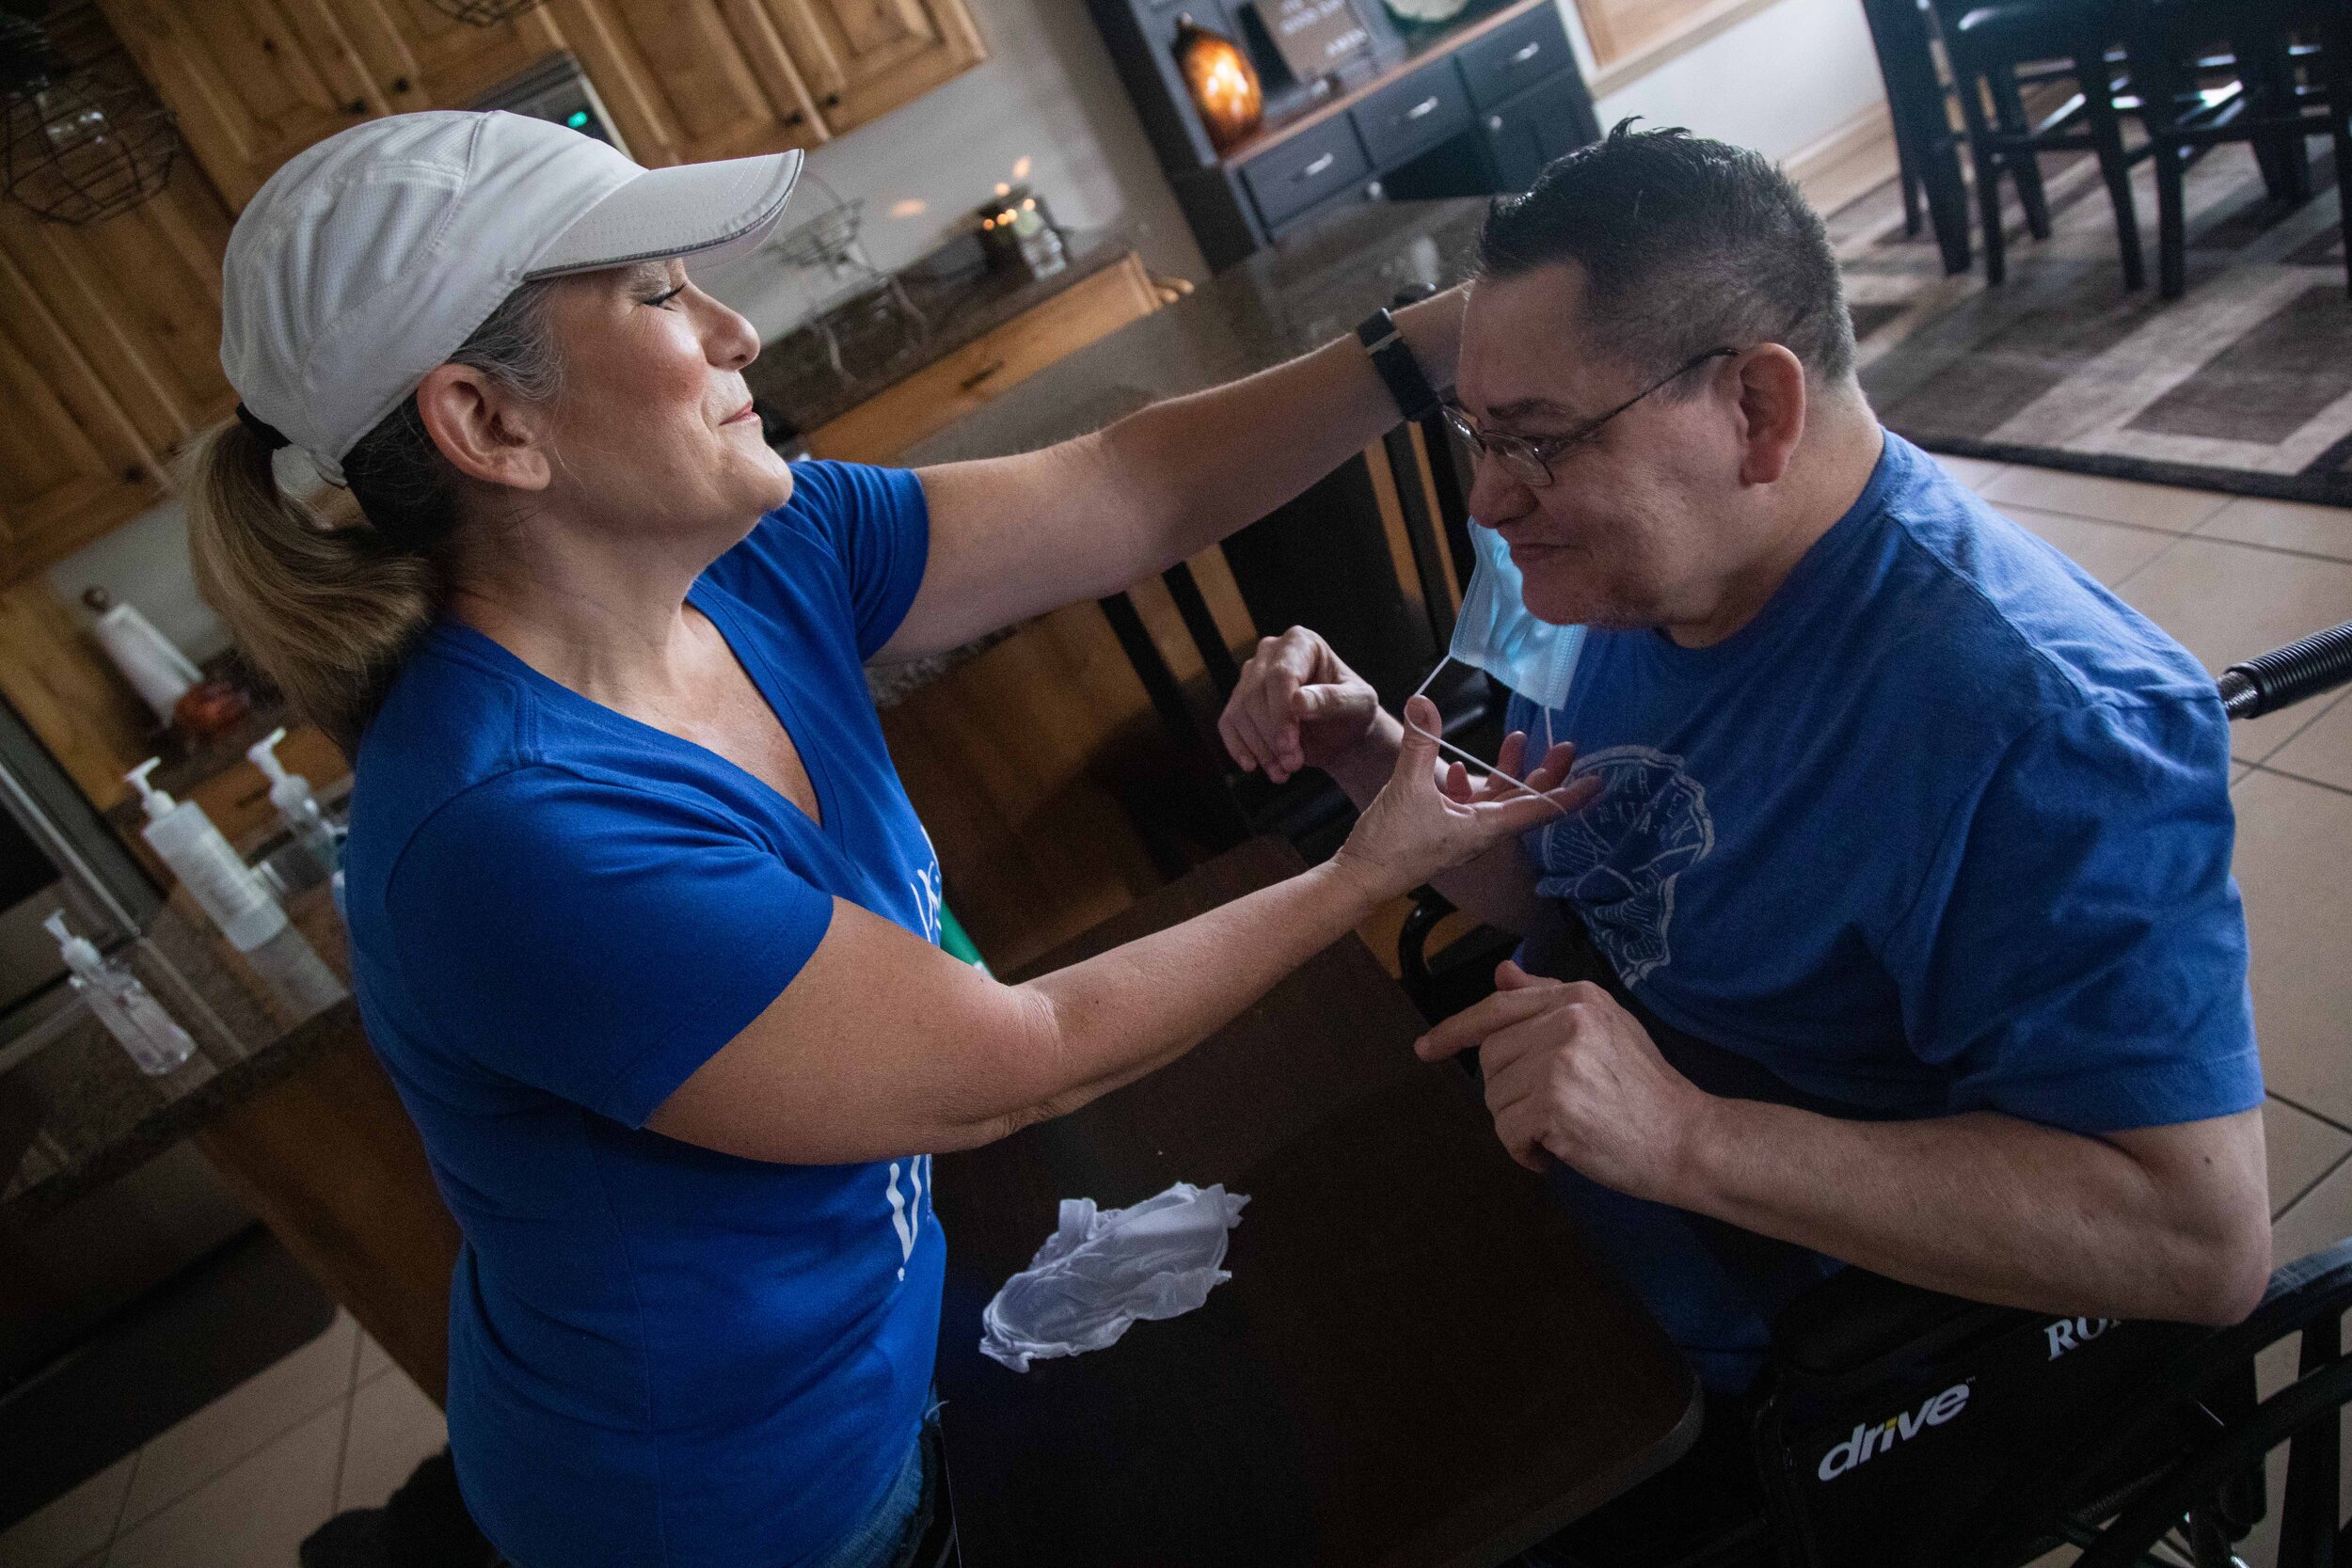  Denise Vigil-Thieldfoldt, left, helps her cousin Ron Vigil put on a mask on Friday, May 22, 2020, in Syracuse, Utah. Ron has Cerebral Palsy. Before living with his cousin, he was a resident at Heritage Park Healthcare and Rehabilitative Services in 